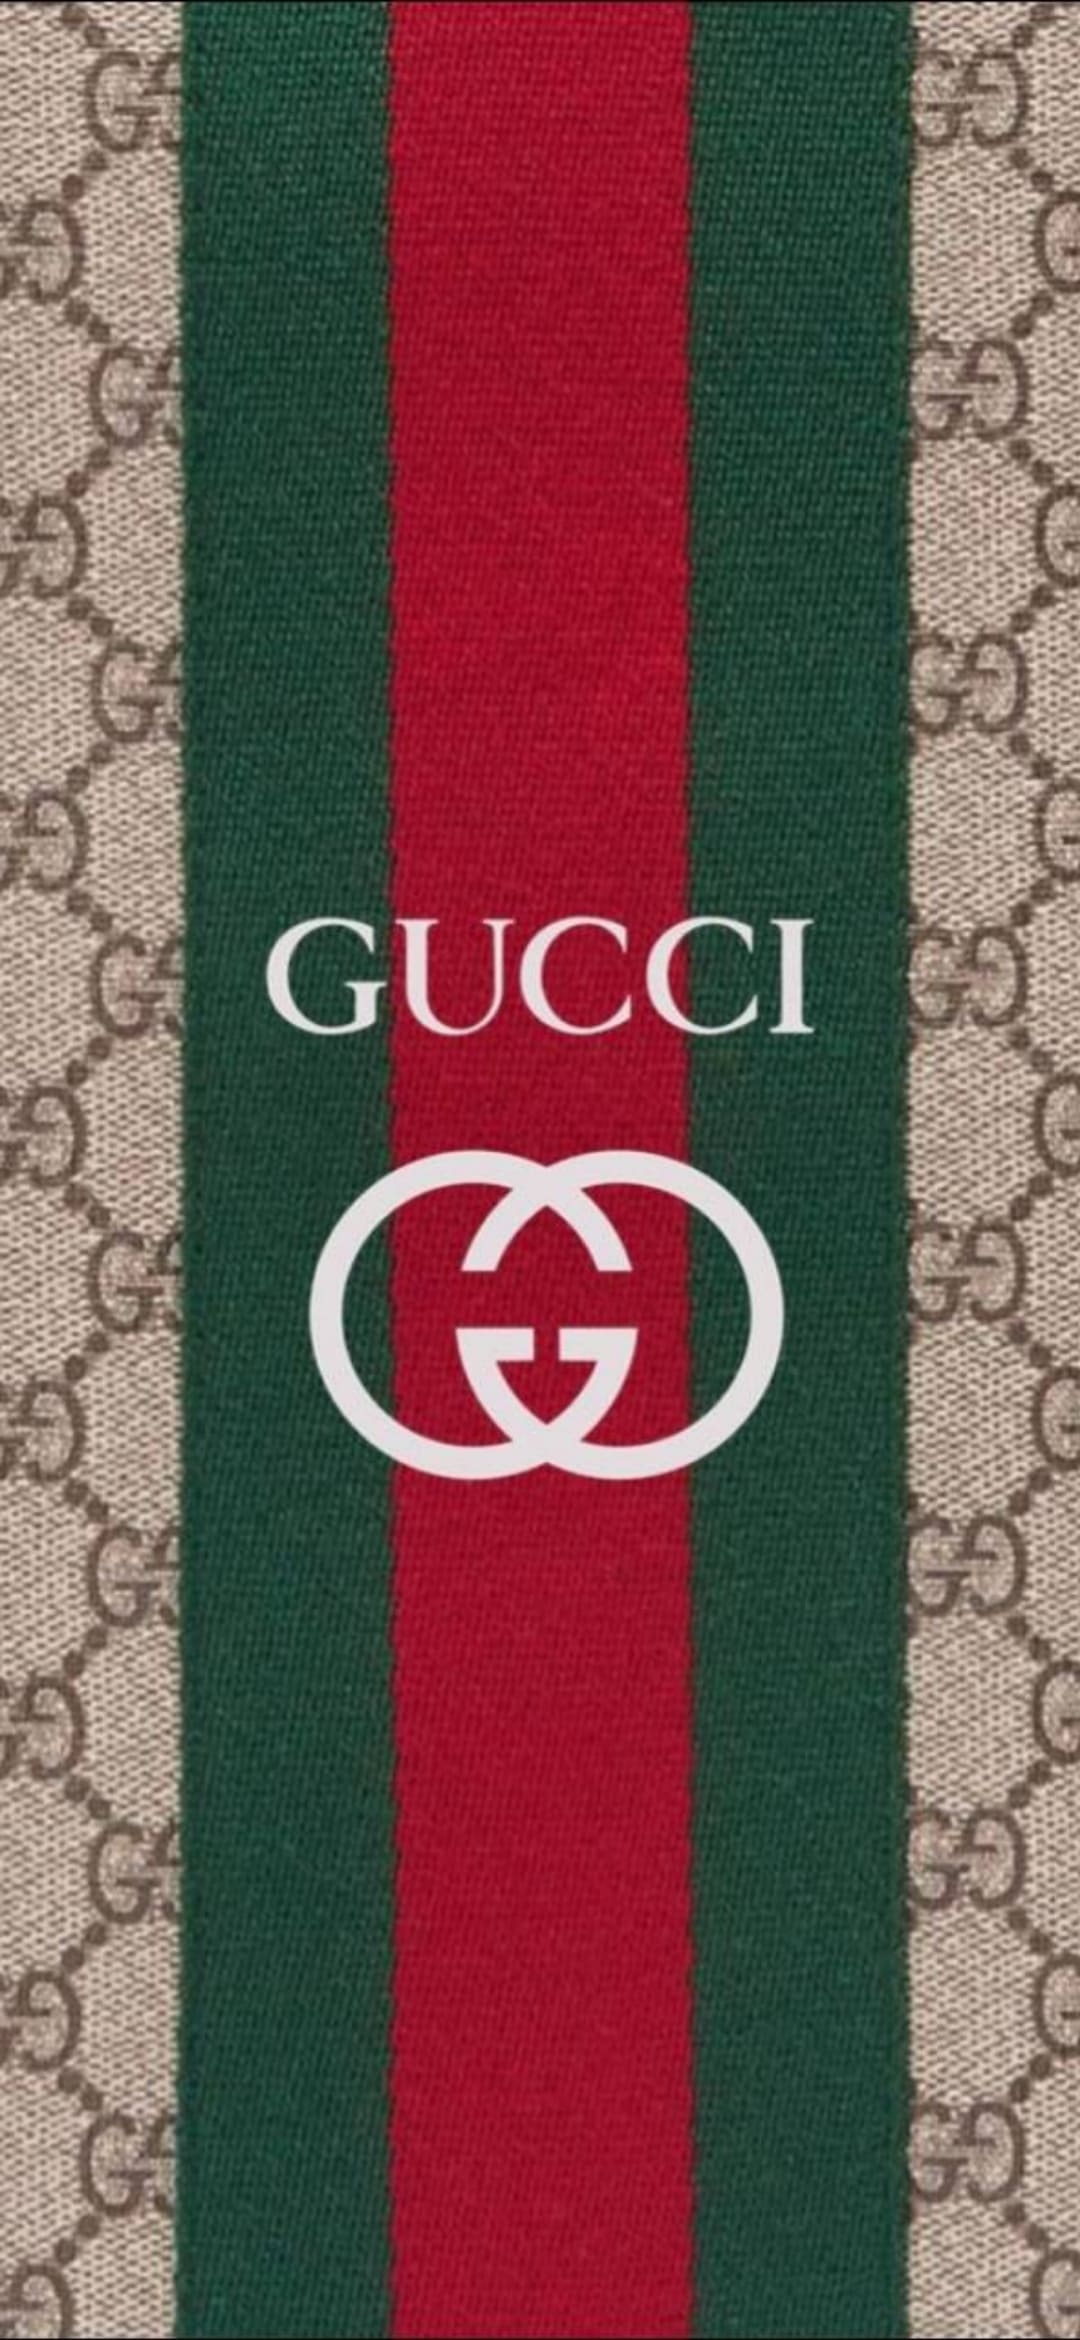 Gucci Wallpapers - Top 35 Best Gucci